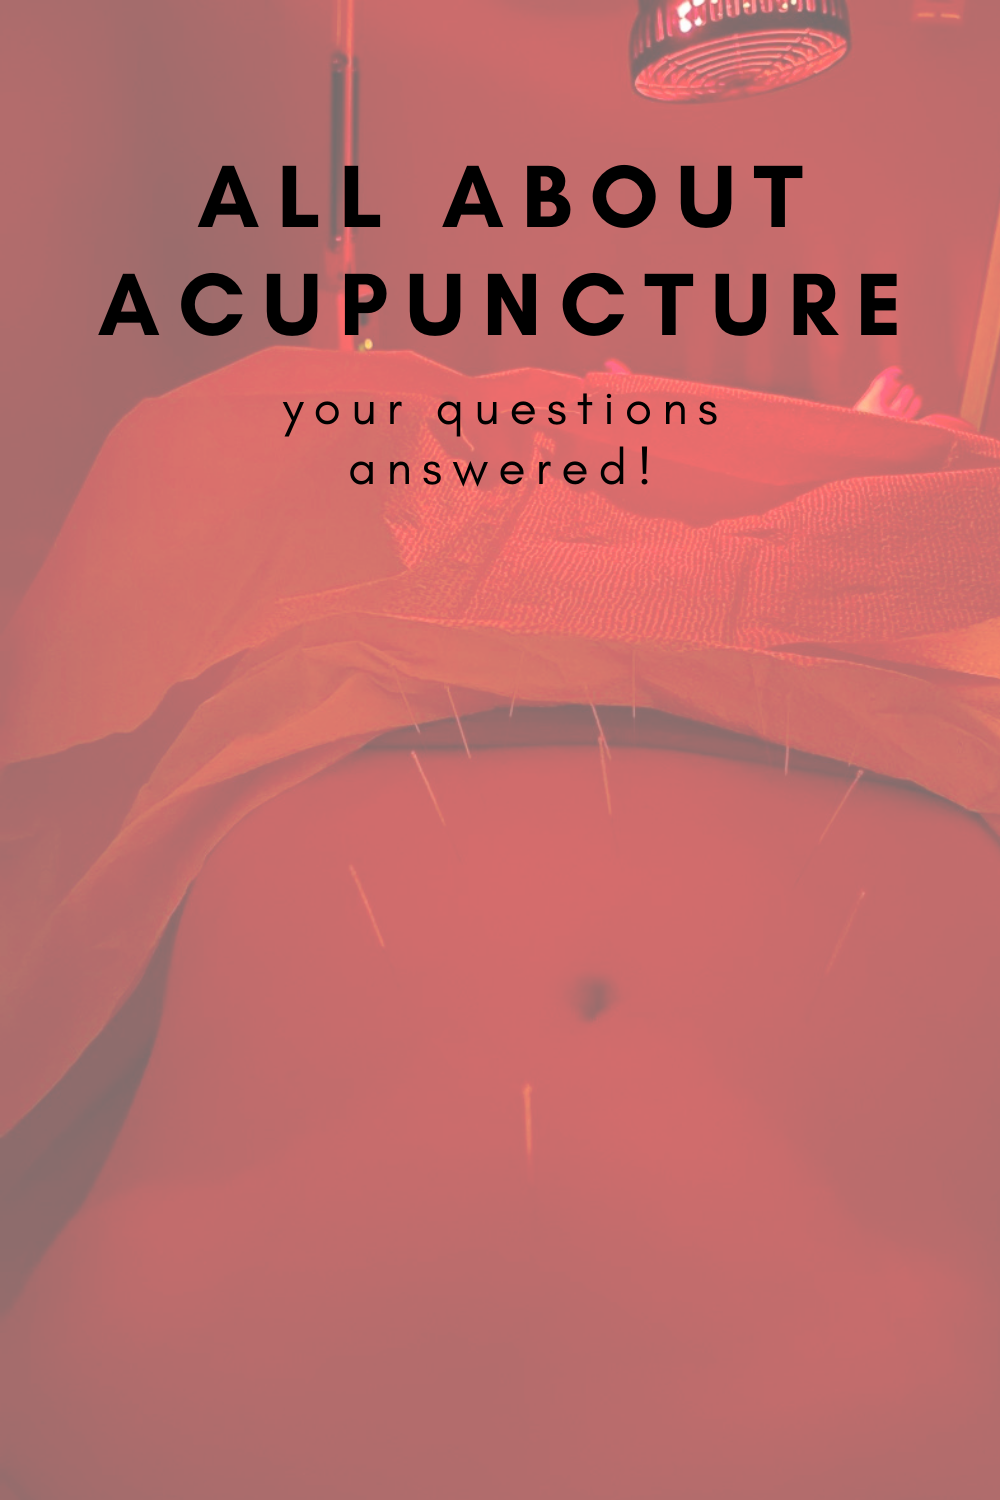 all about acupuncture, lments of style, la blogger, is it worth it, does acupuncture hurt, afraid of needles, balancing hormones, fertility, pcos, what to expect, cupping, insurance, Eastern Medicine, Chinese Medicine